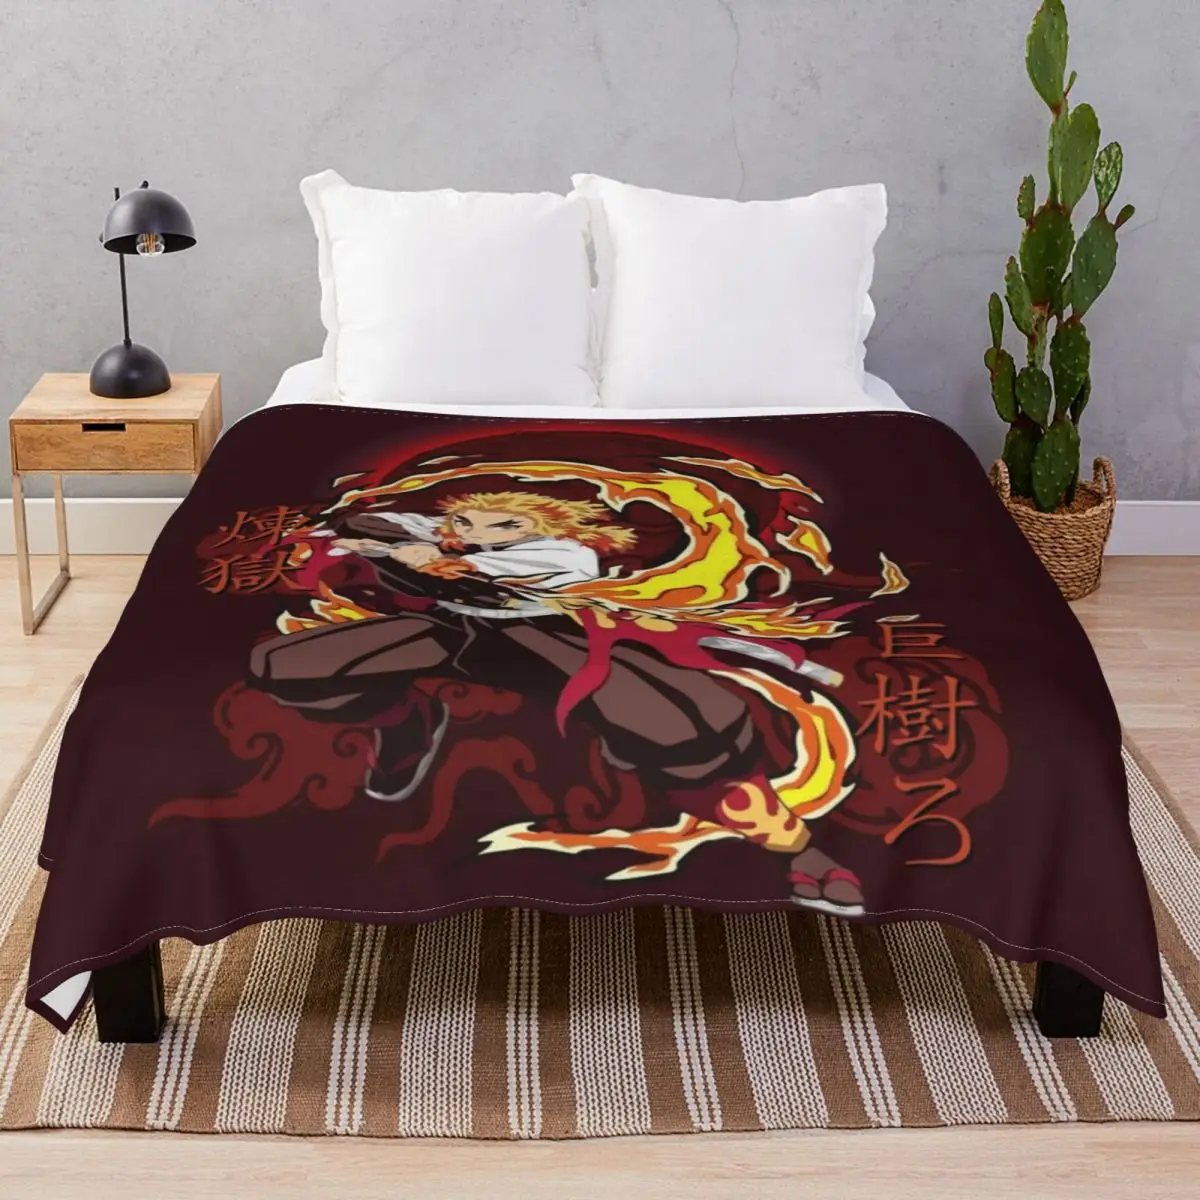 Kimetsu No Yaiba Blanket Flannel All Season Fluffy Throw Blankets for Bed Home Couch Camp Office